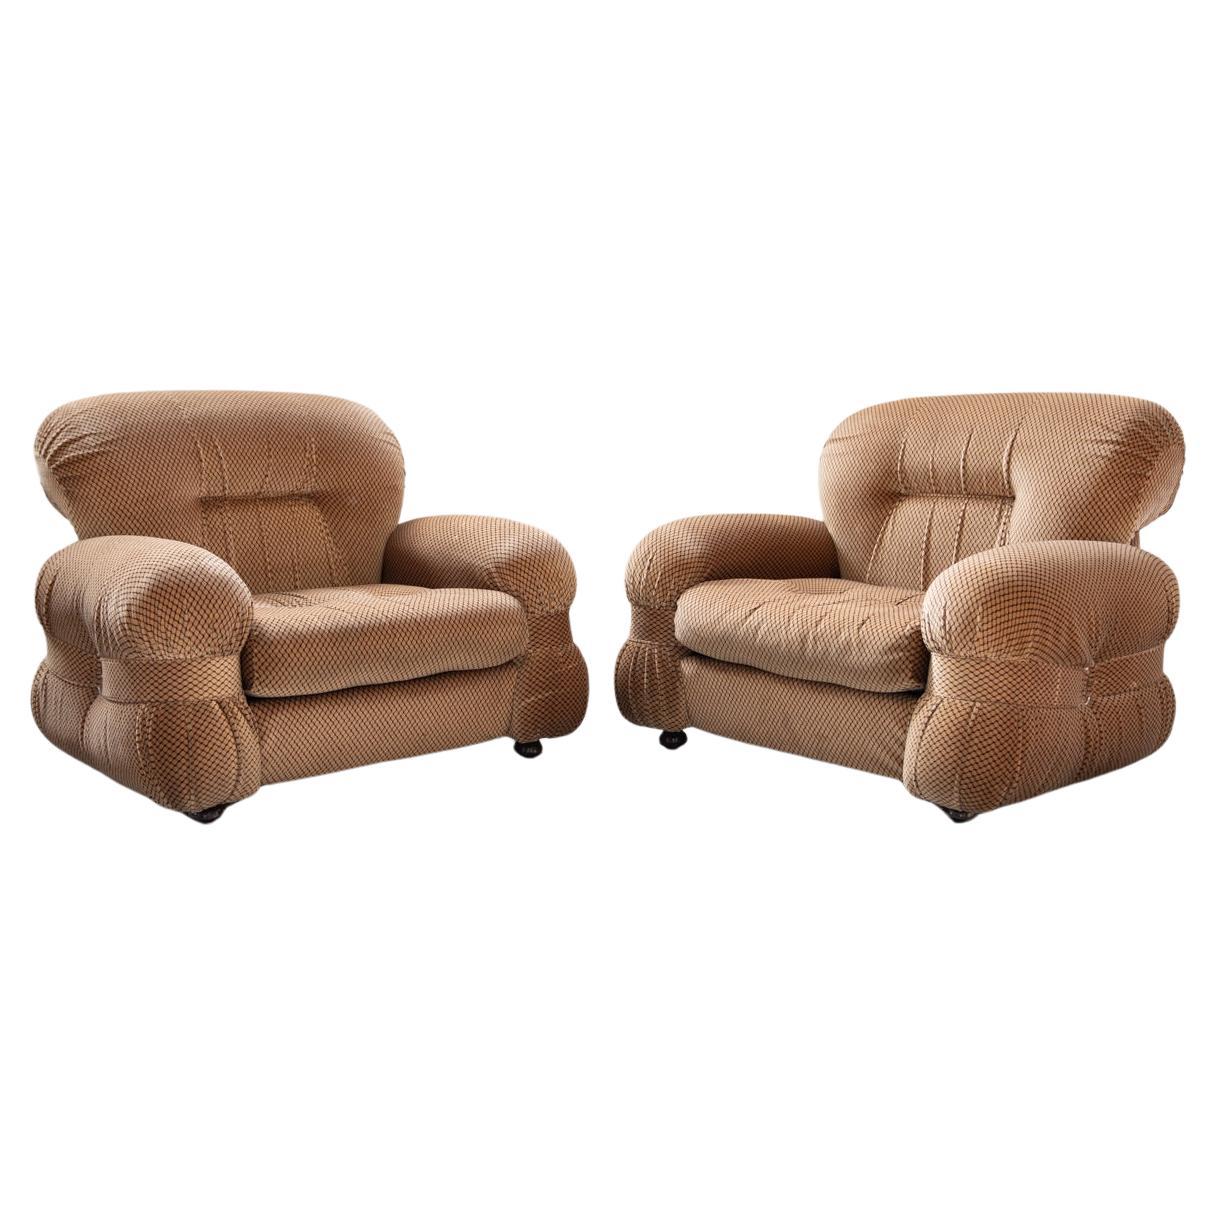 Pair of chenille armchairs, style Adriano Piazzesi 1970s For Sale